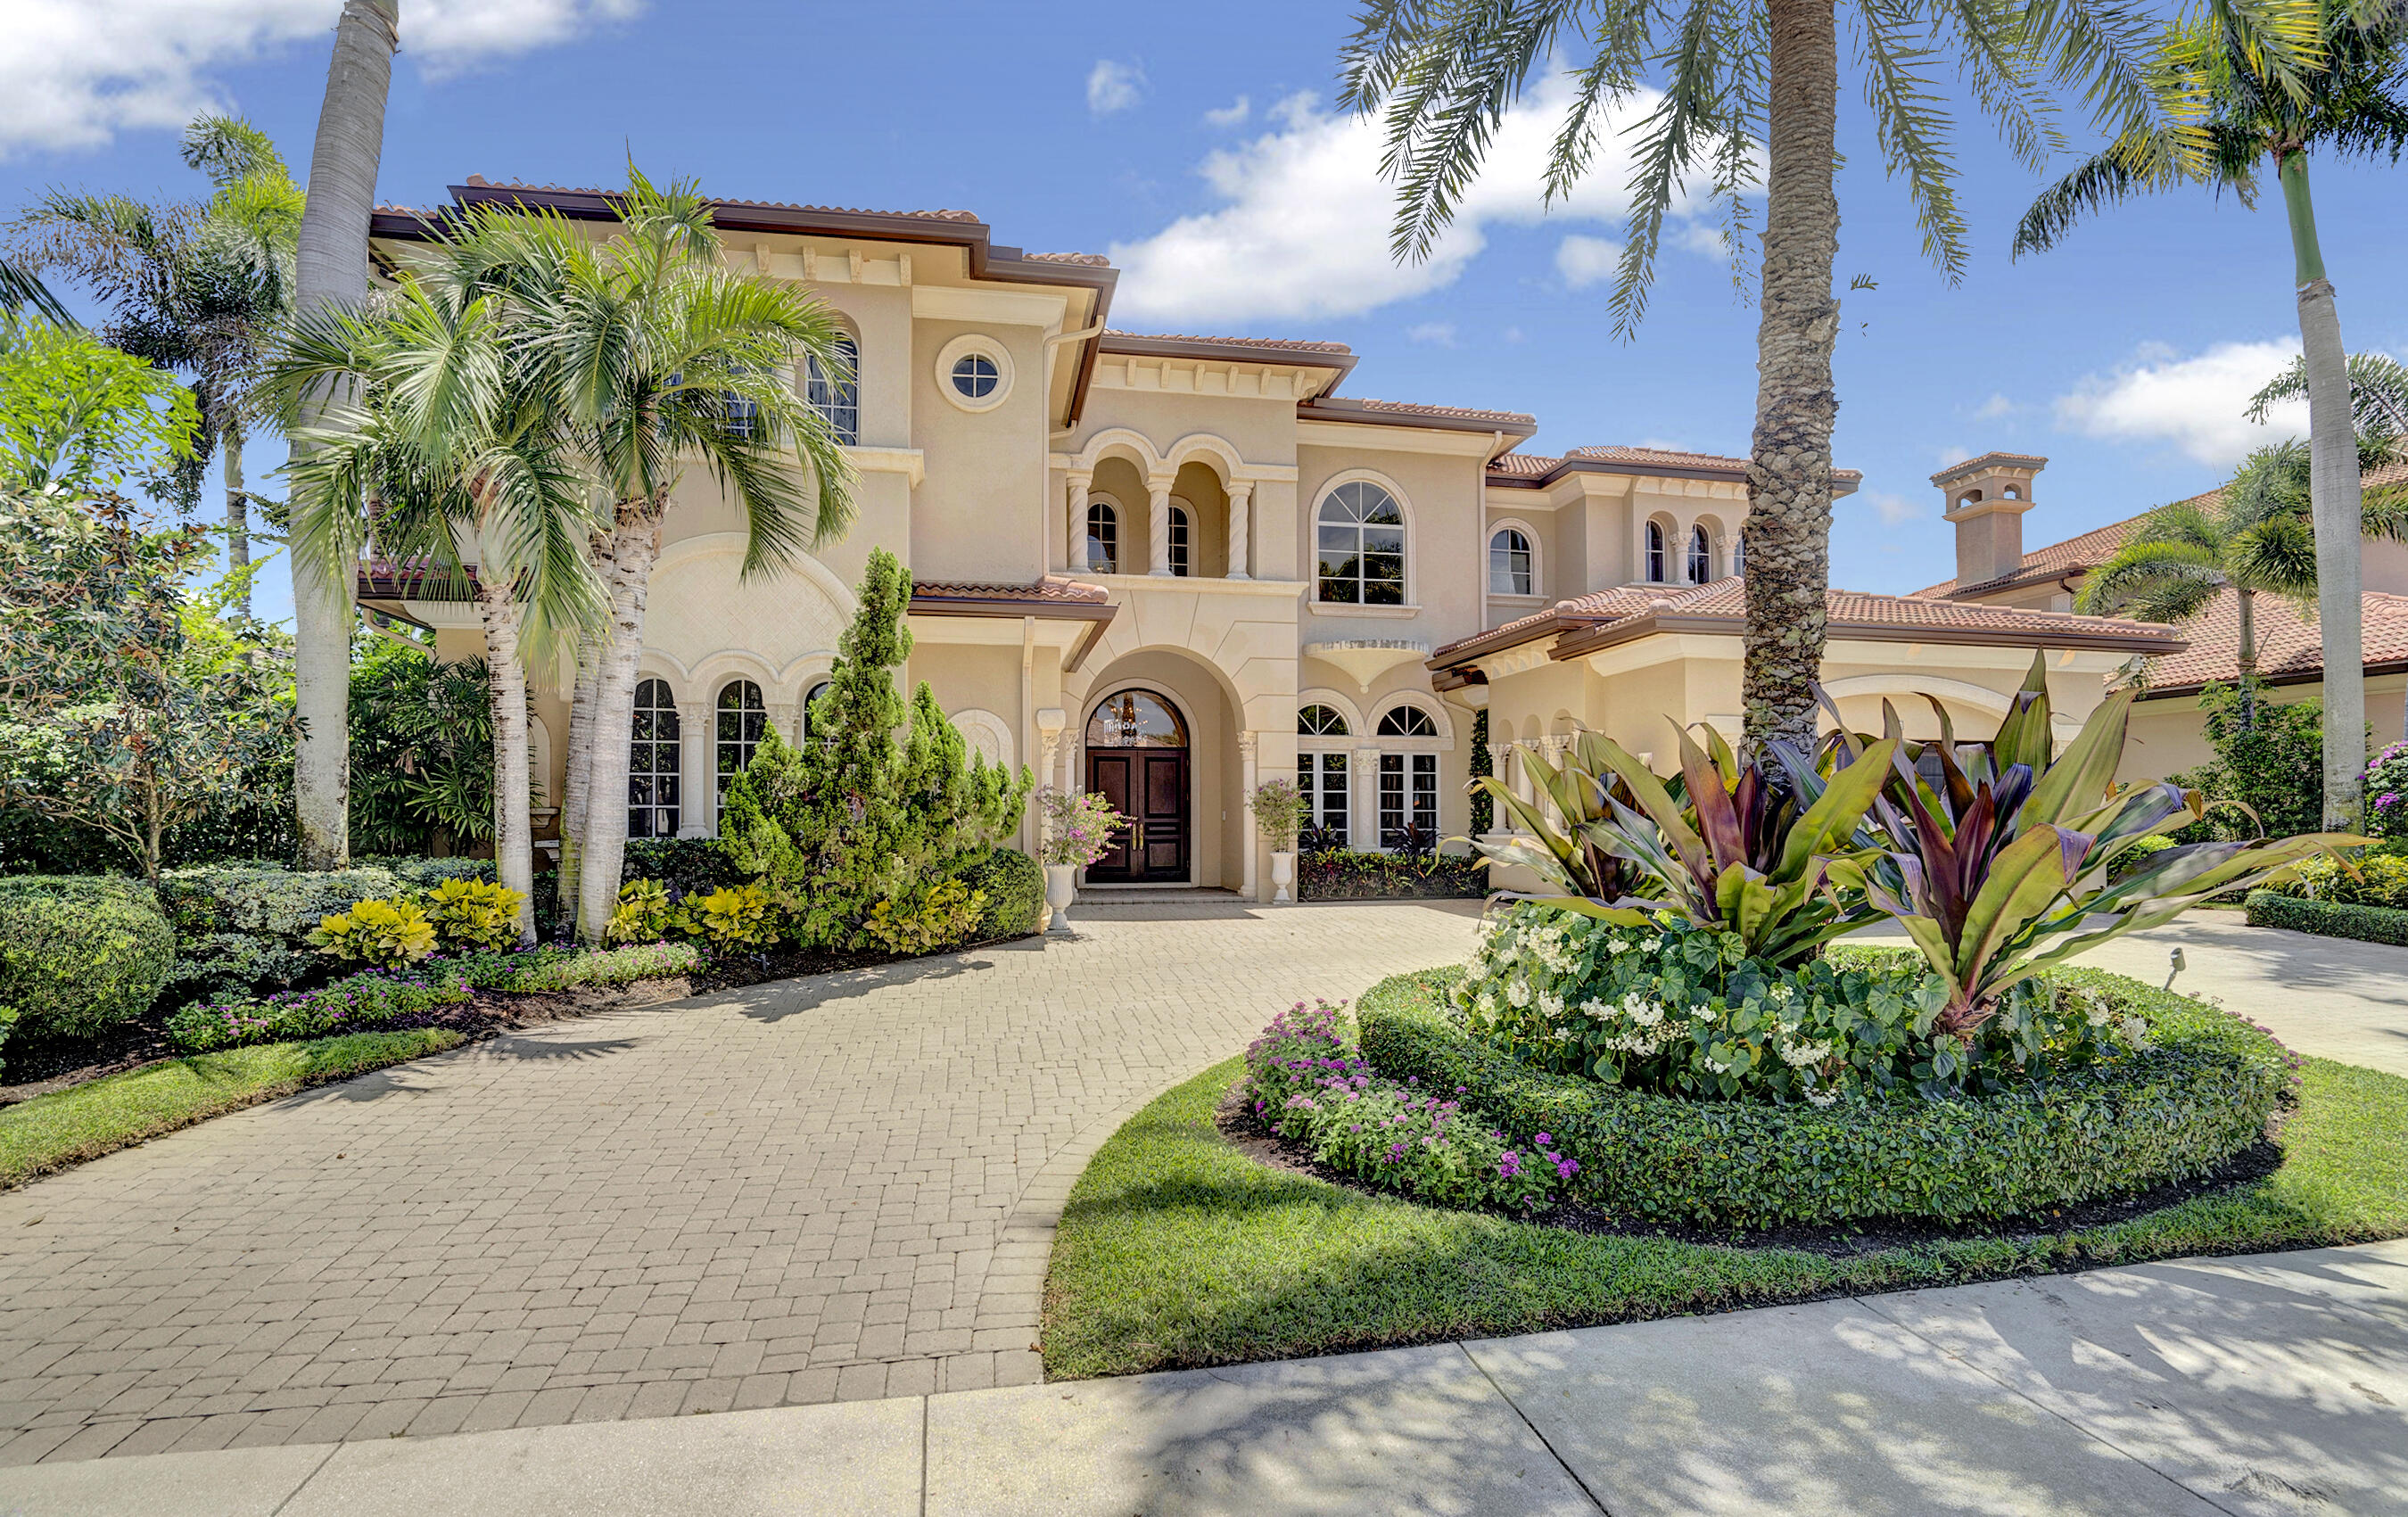 784 Harbour Isles Place, North Palm Beach, Miami-Dade County, Florida - 5 Bedrooms  
5.5 Bathrooms - 